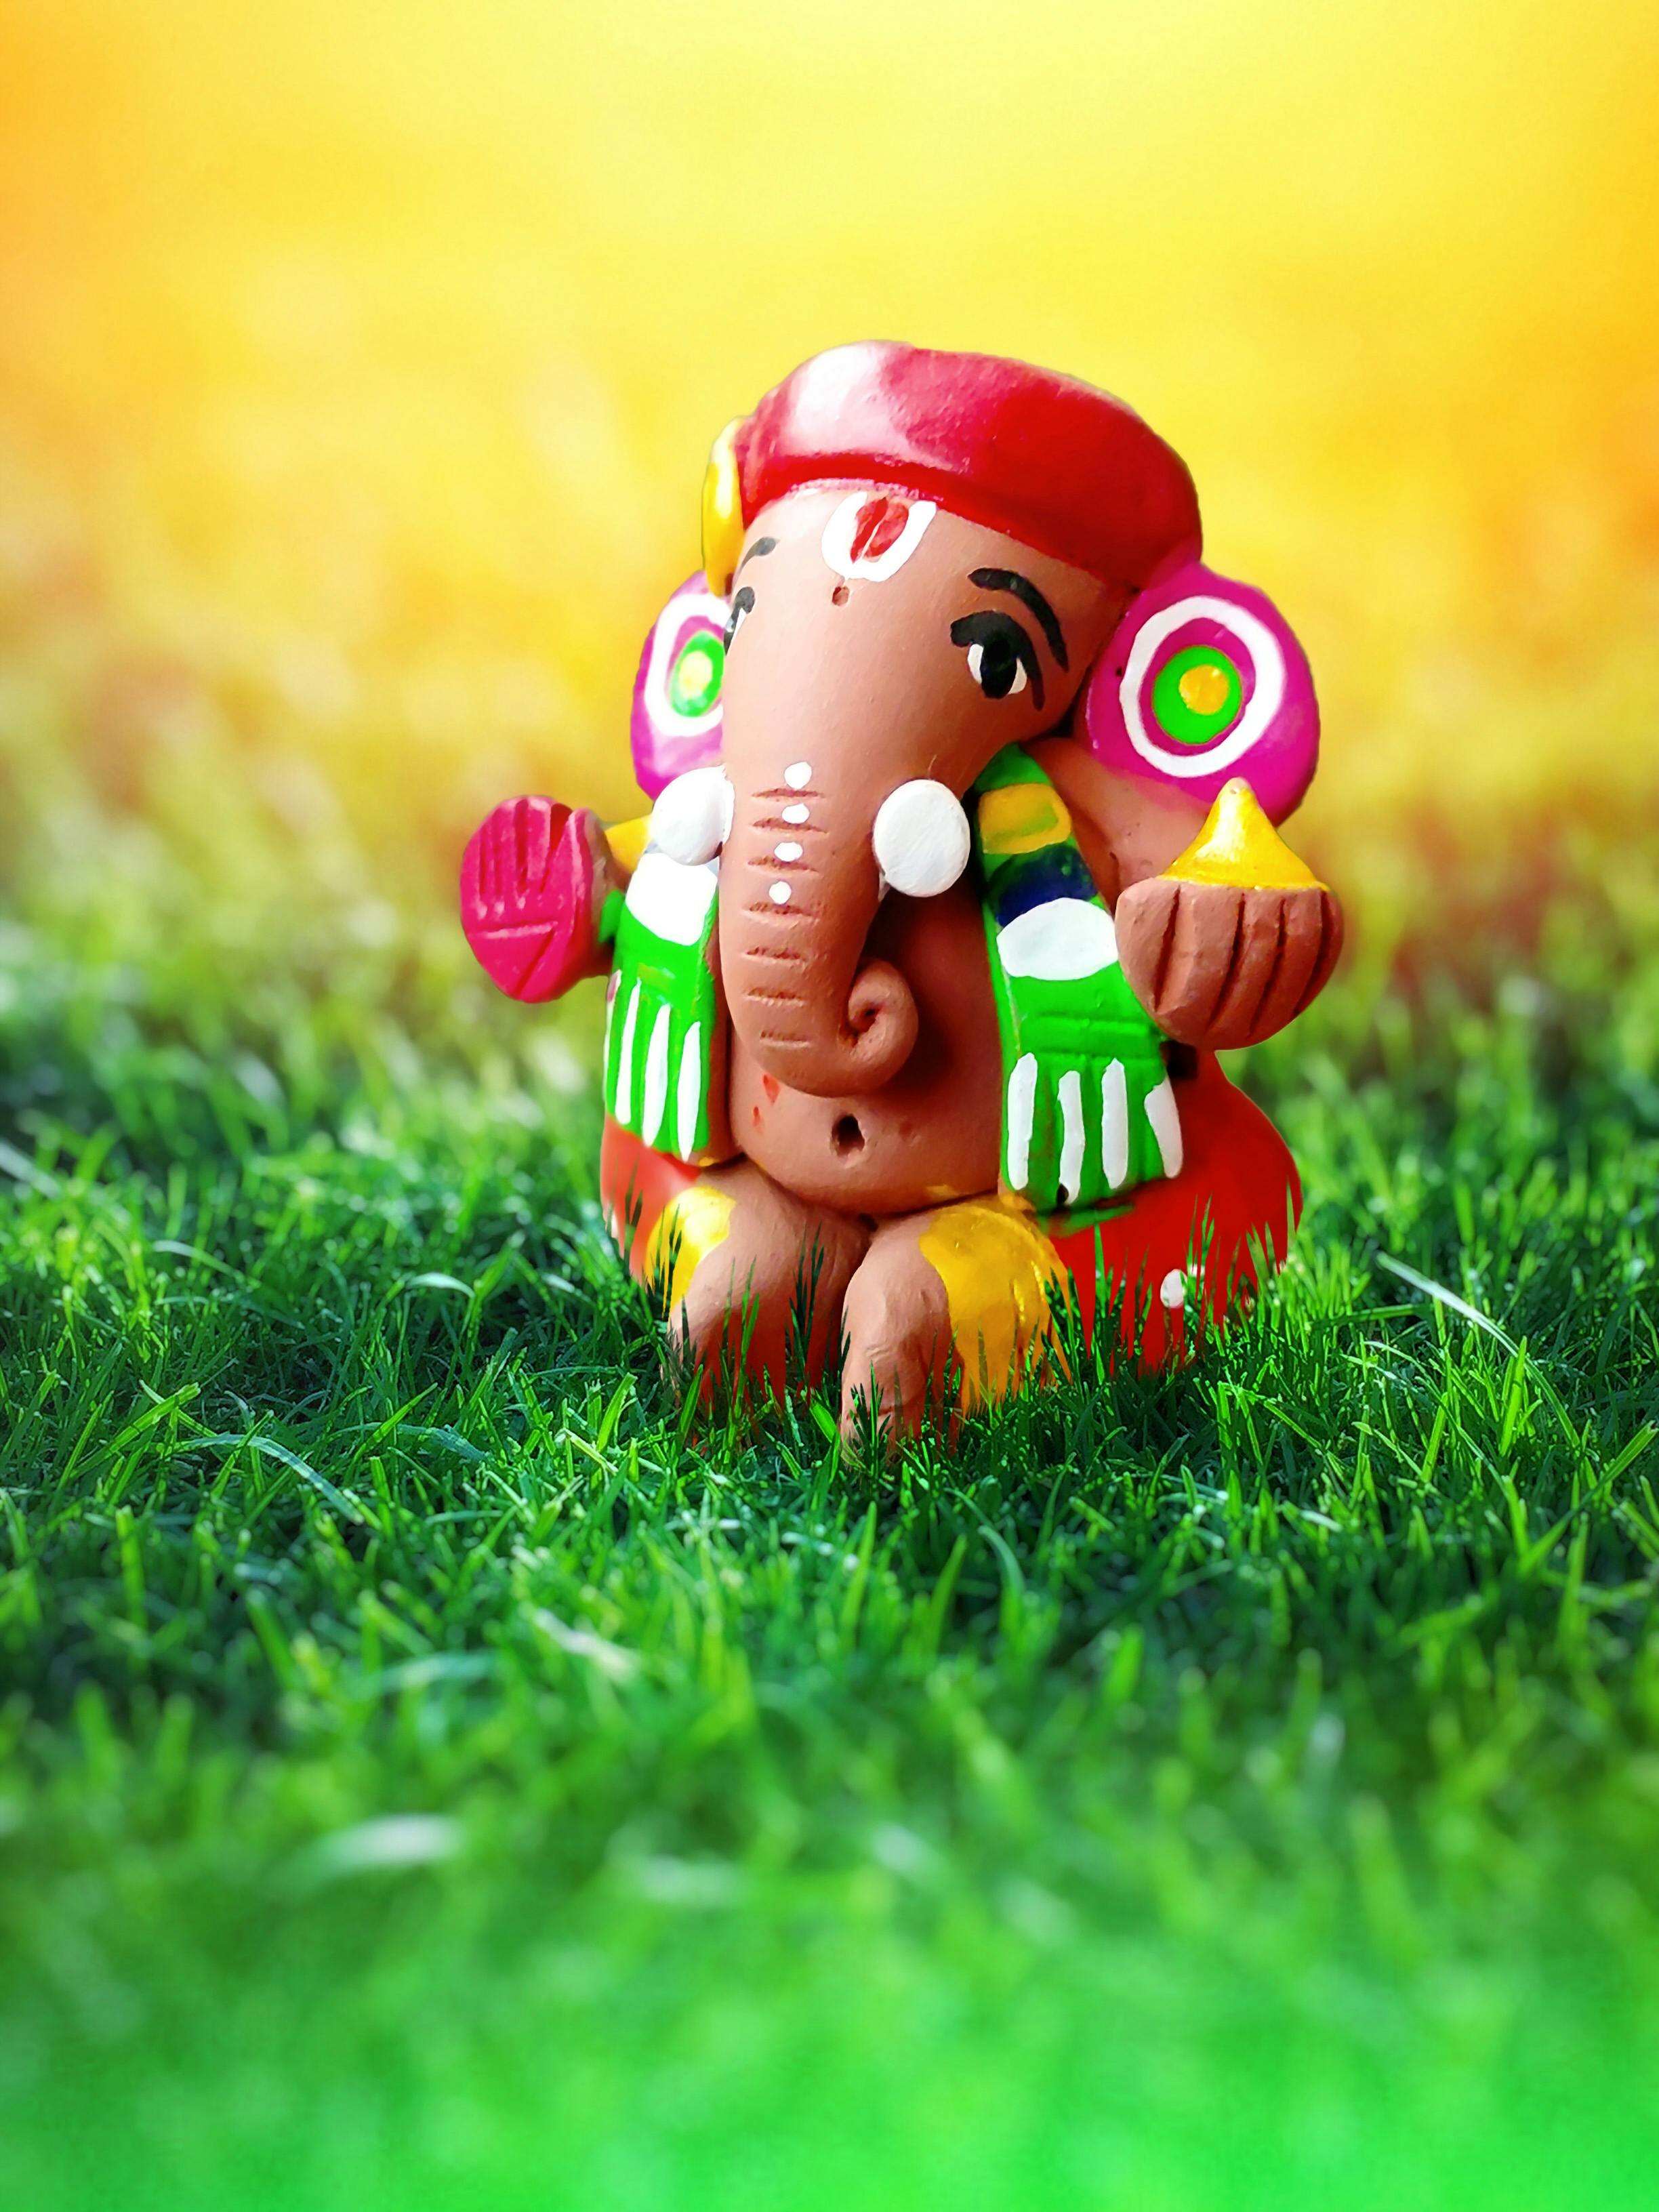 The Ultimate Collection of 4K Ganpati Cute Images  999 Incredible Pictures